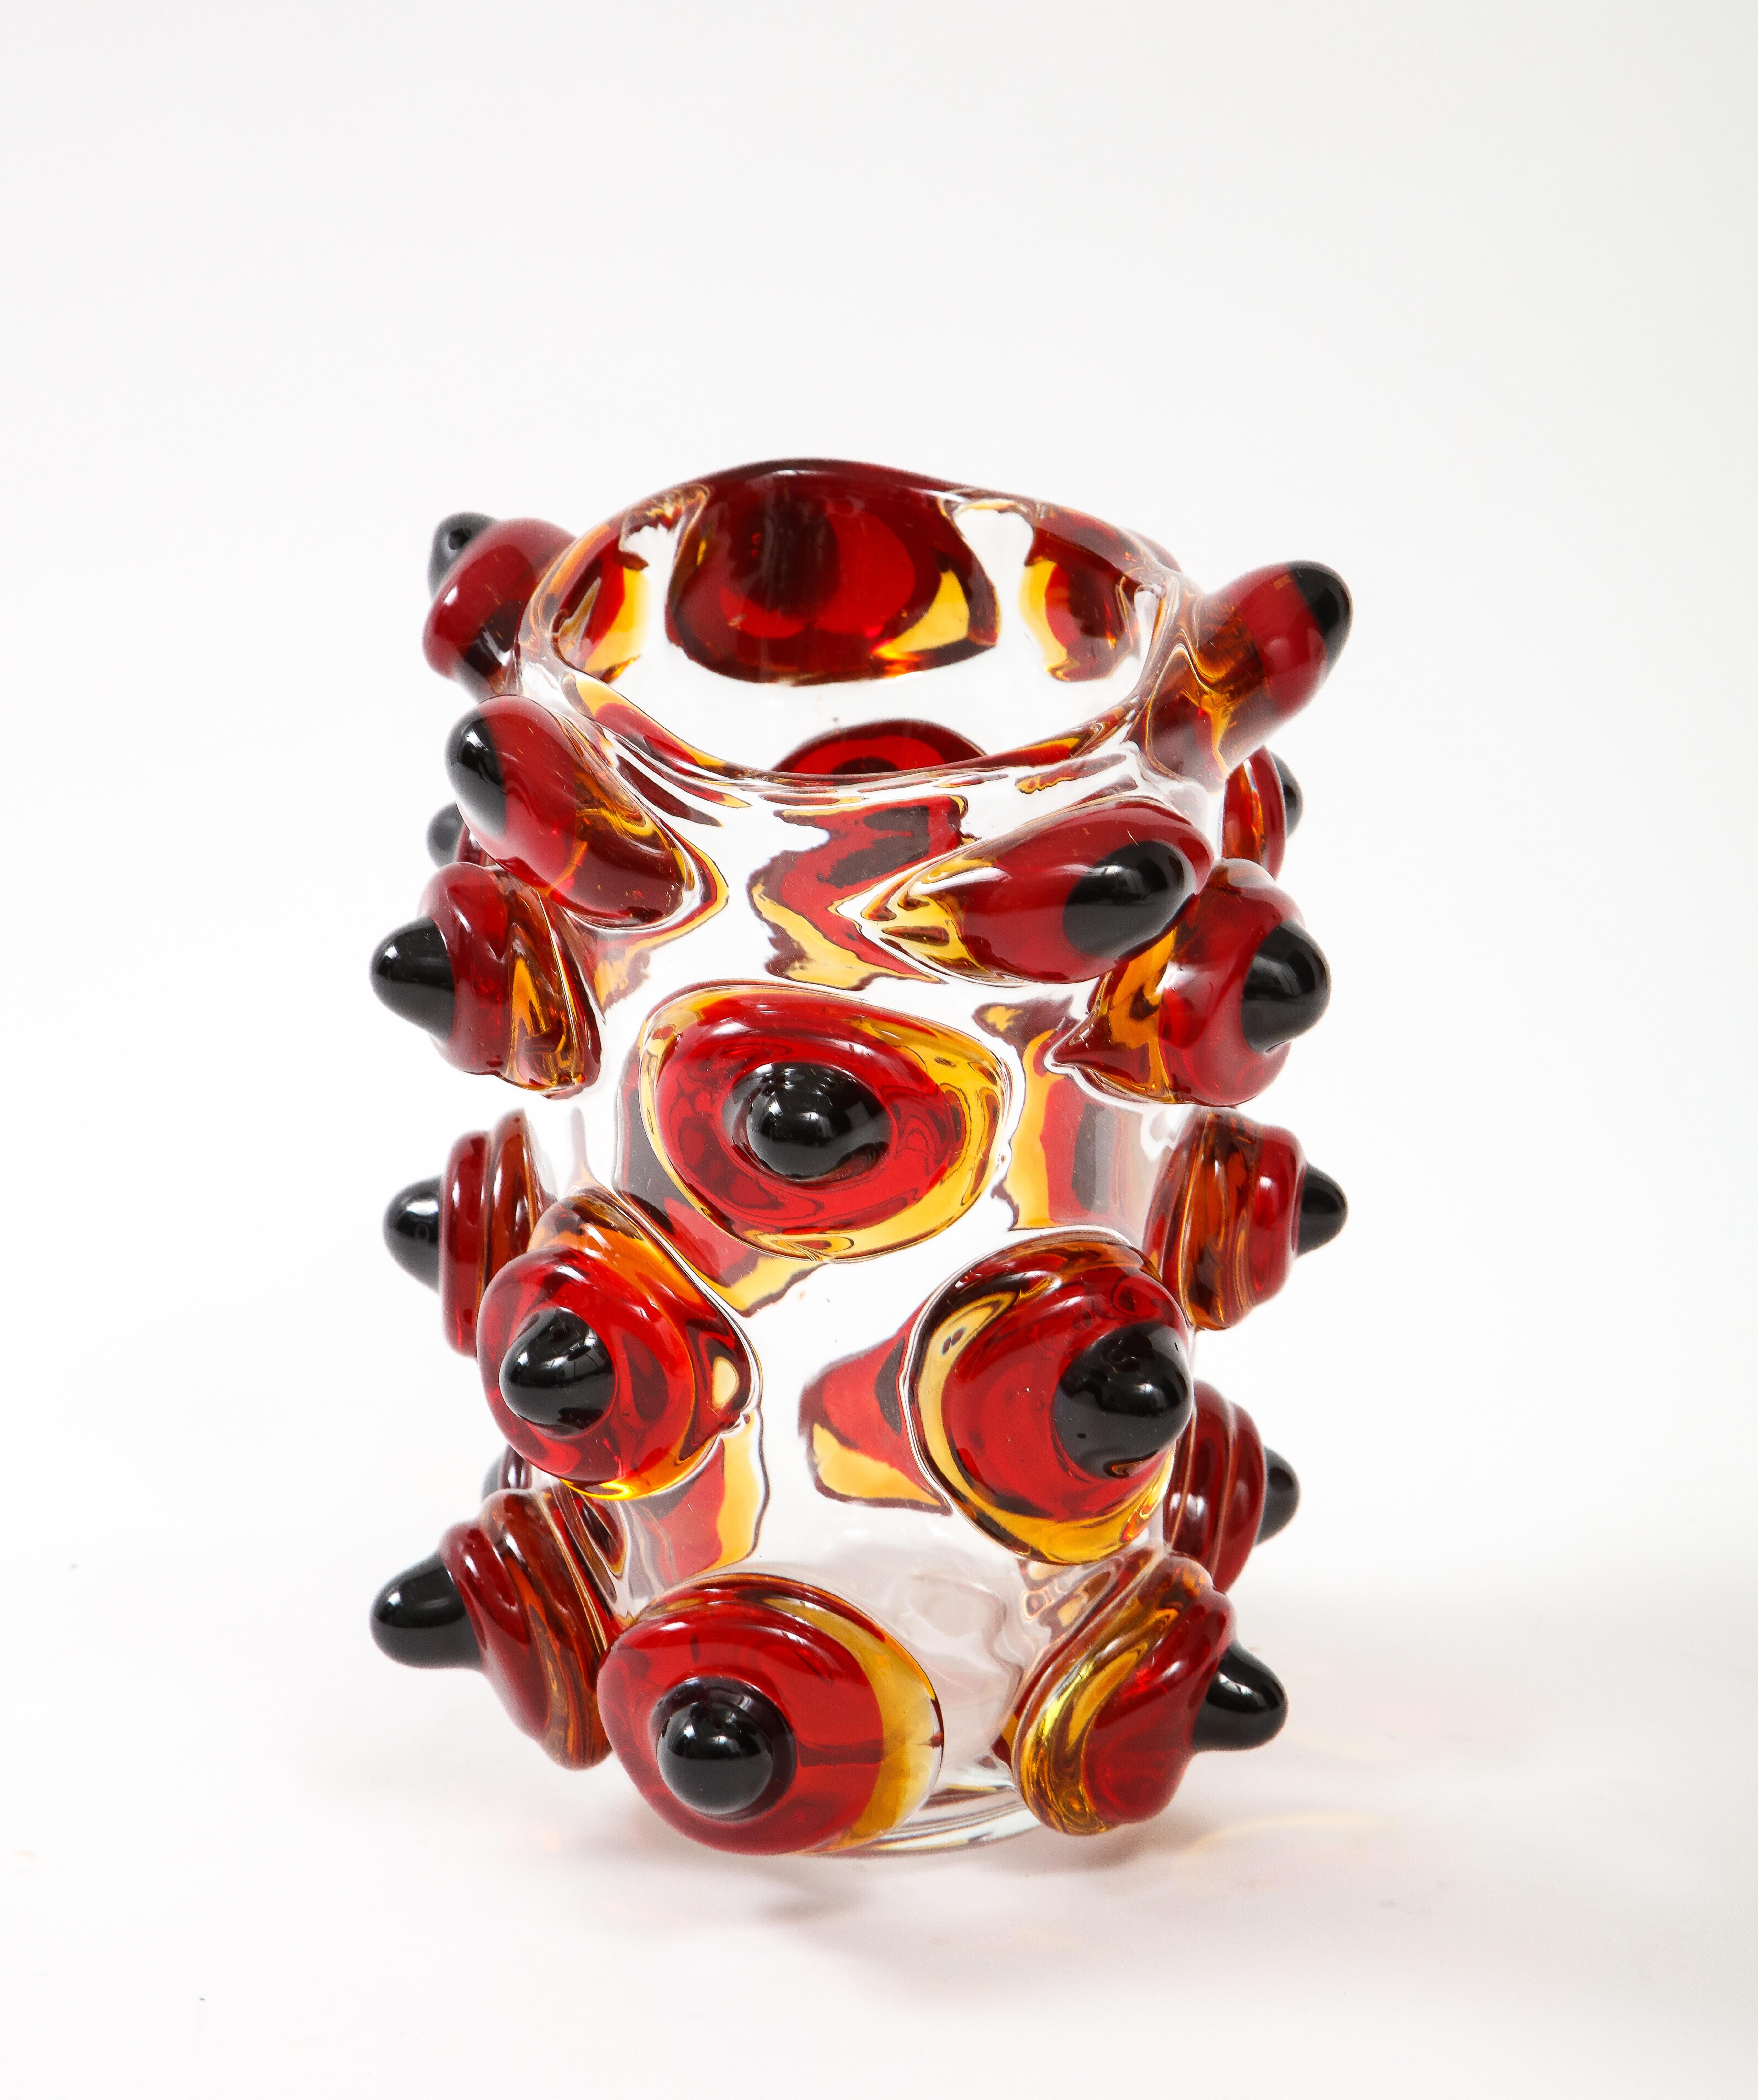 Enrico Commozzo Murano Art Glass Vase In Excellent Condition For Sale In New York, NY